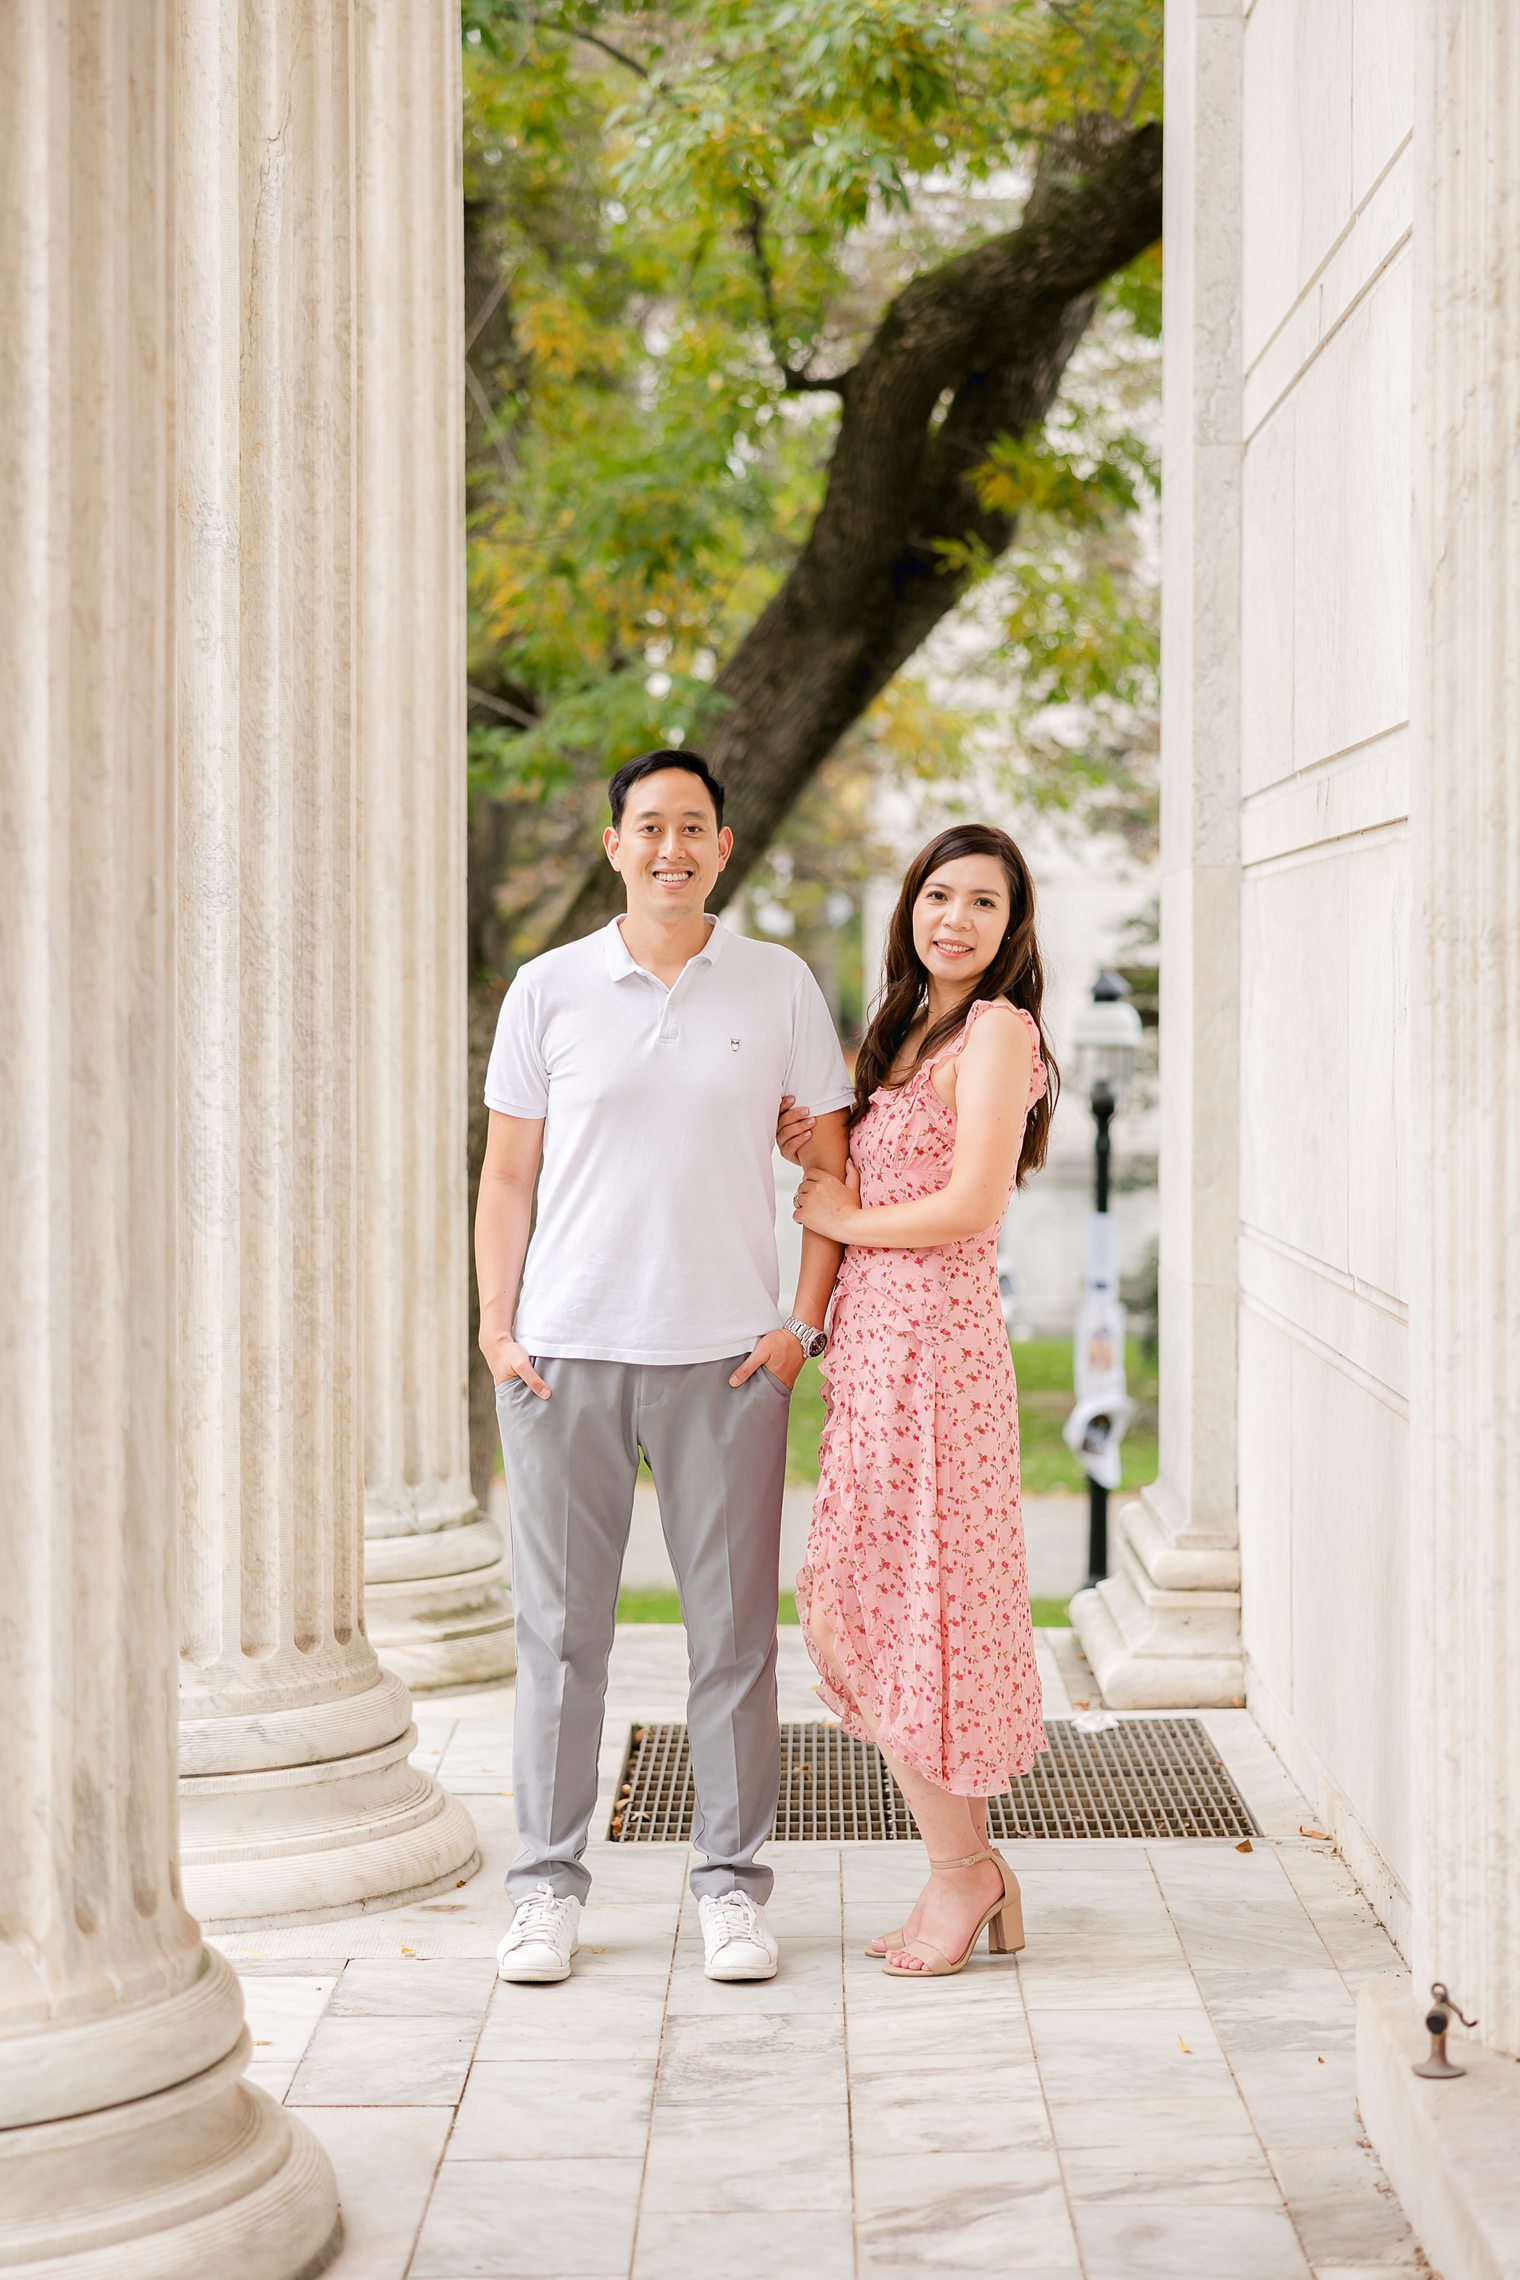 Future husband and wife posing during their engagement session at Princeton Campus University